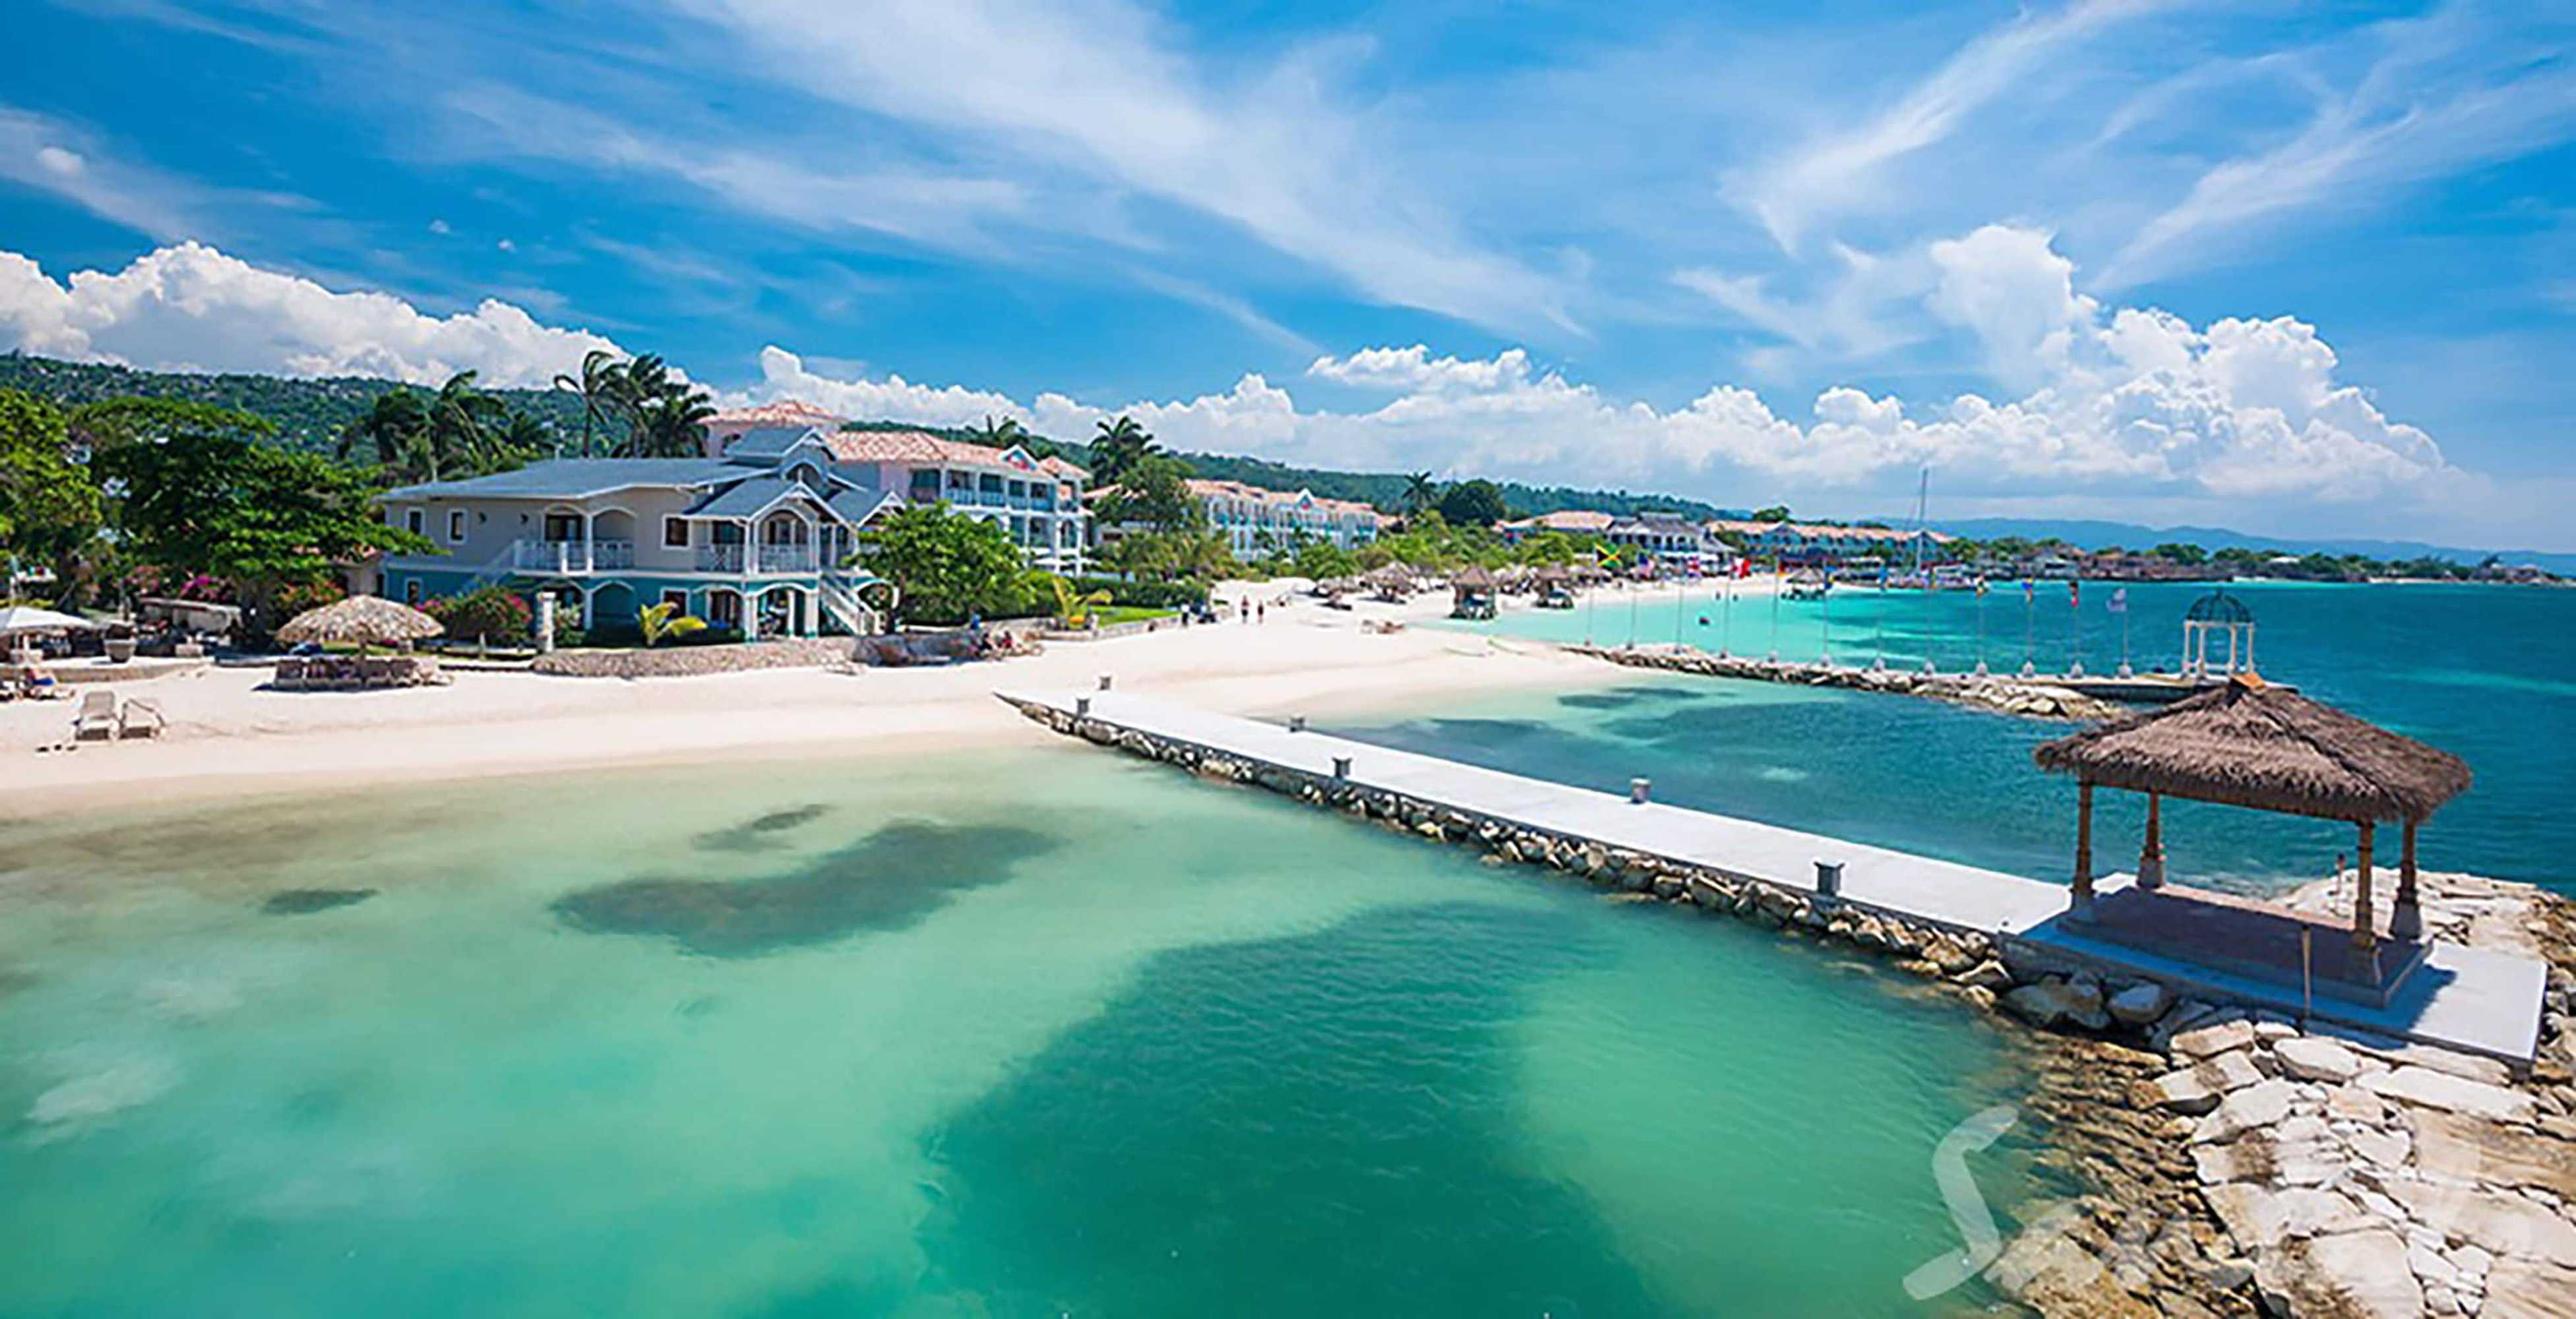 26 Sandals Resorts International Properties For Your All-Inclusive Luxury  Caribbean Vacation | Caribbean & Co.